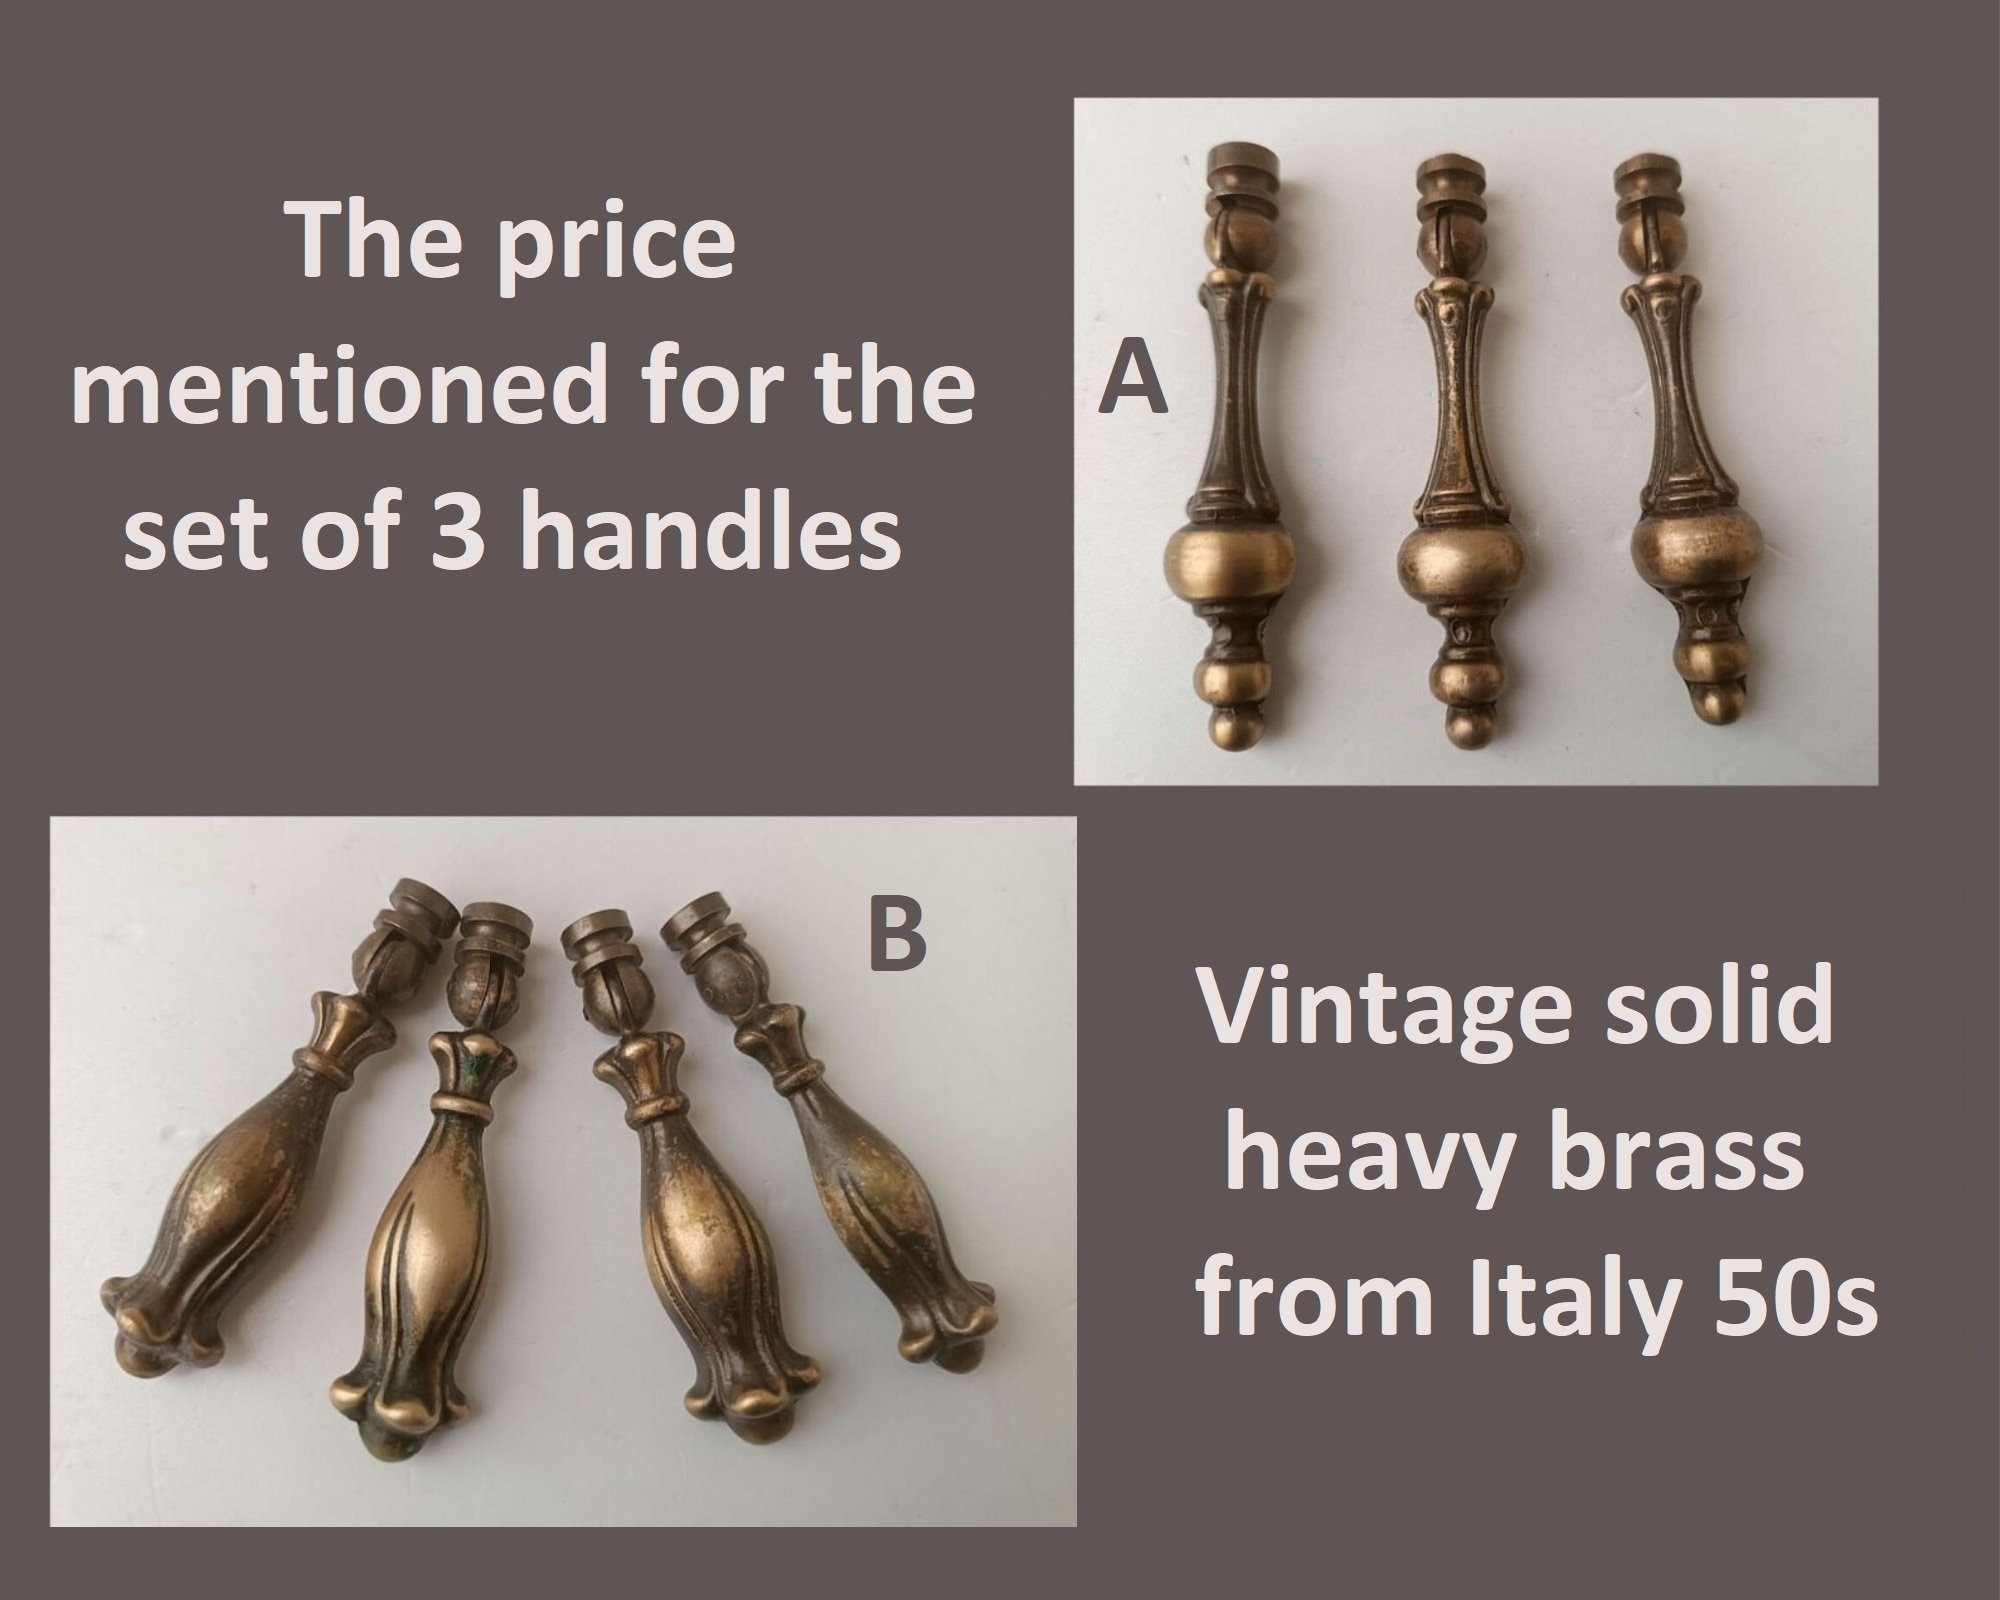 Buy Vintage Italy Brass Online In India -  India